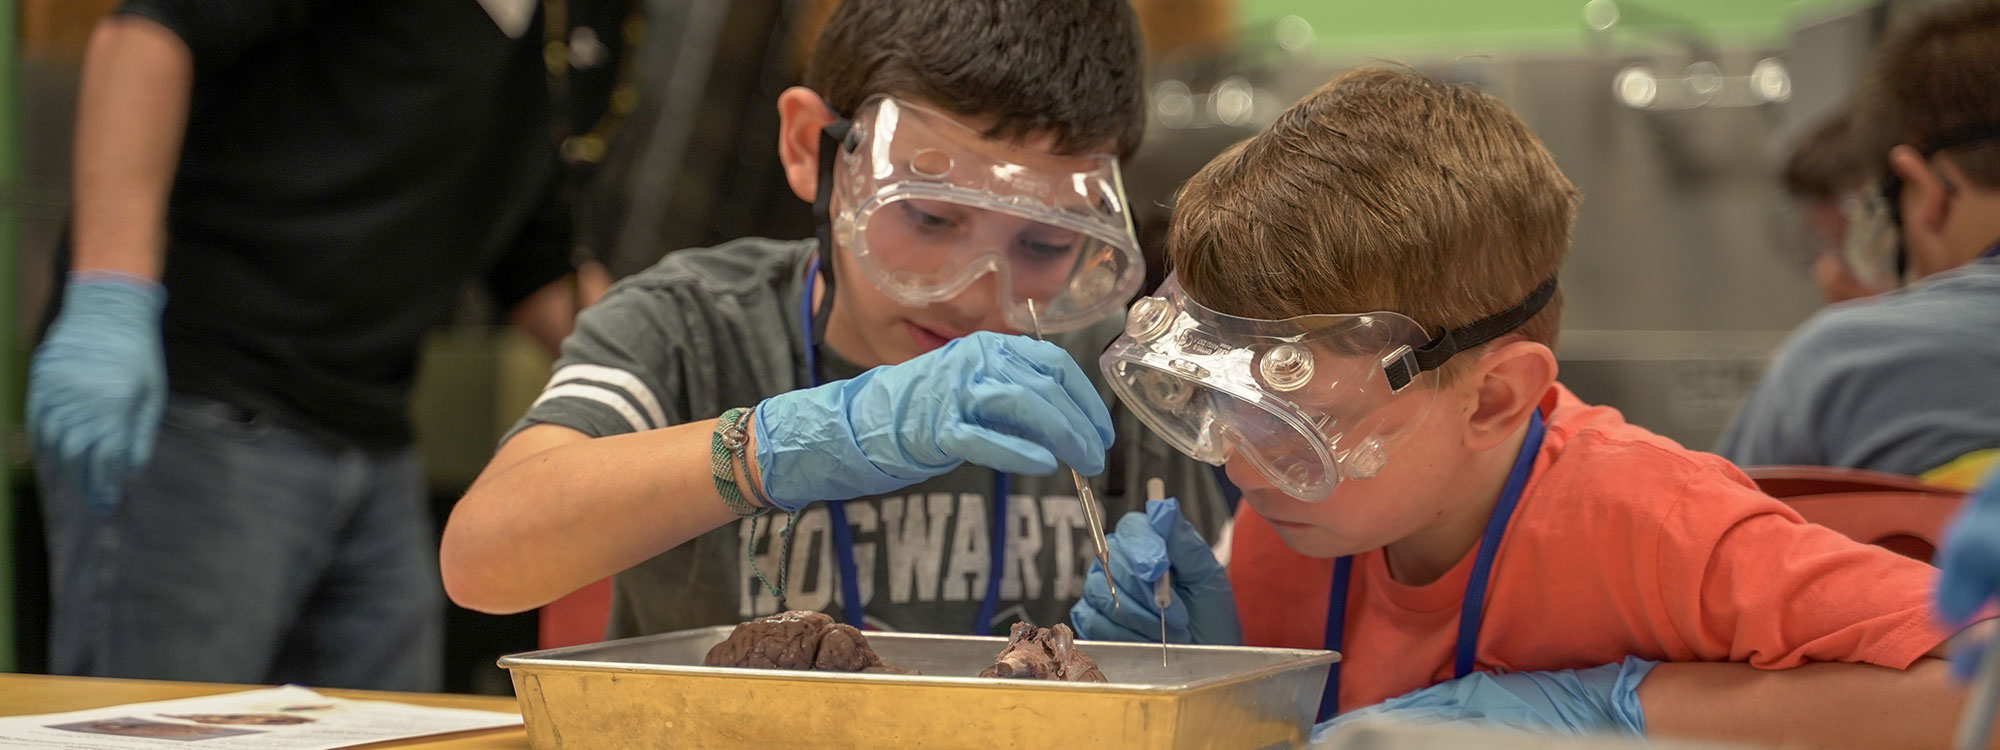 Two young boys dissect a sheep brain with the help of instructor.